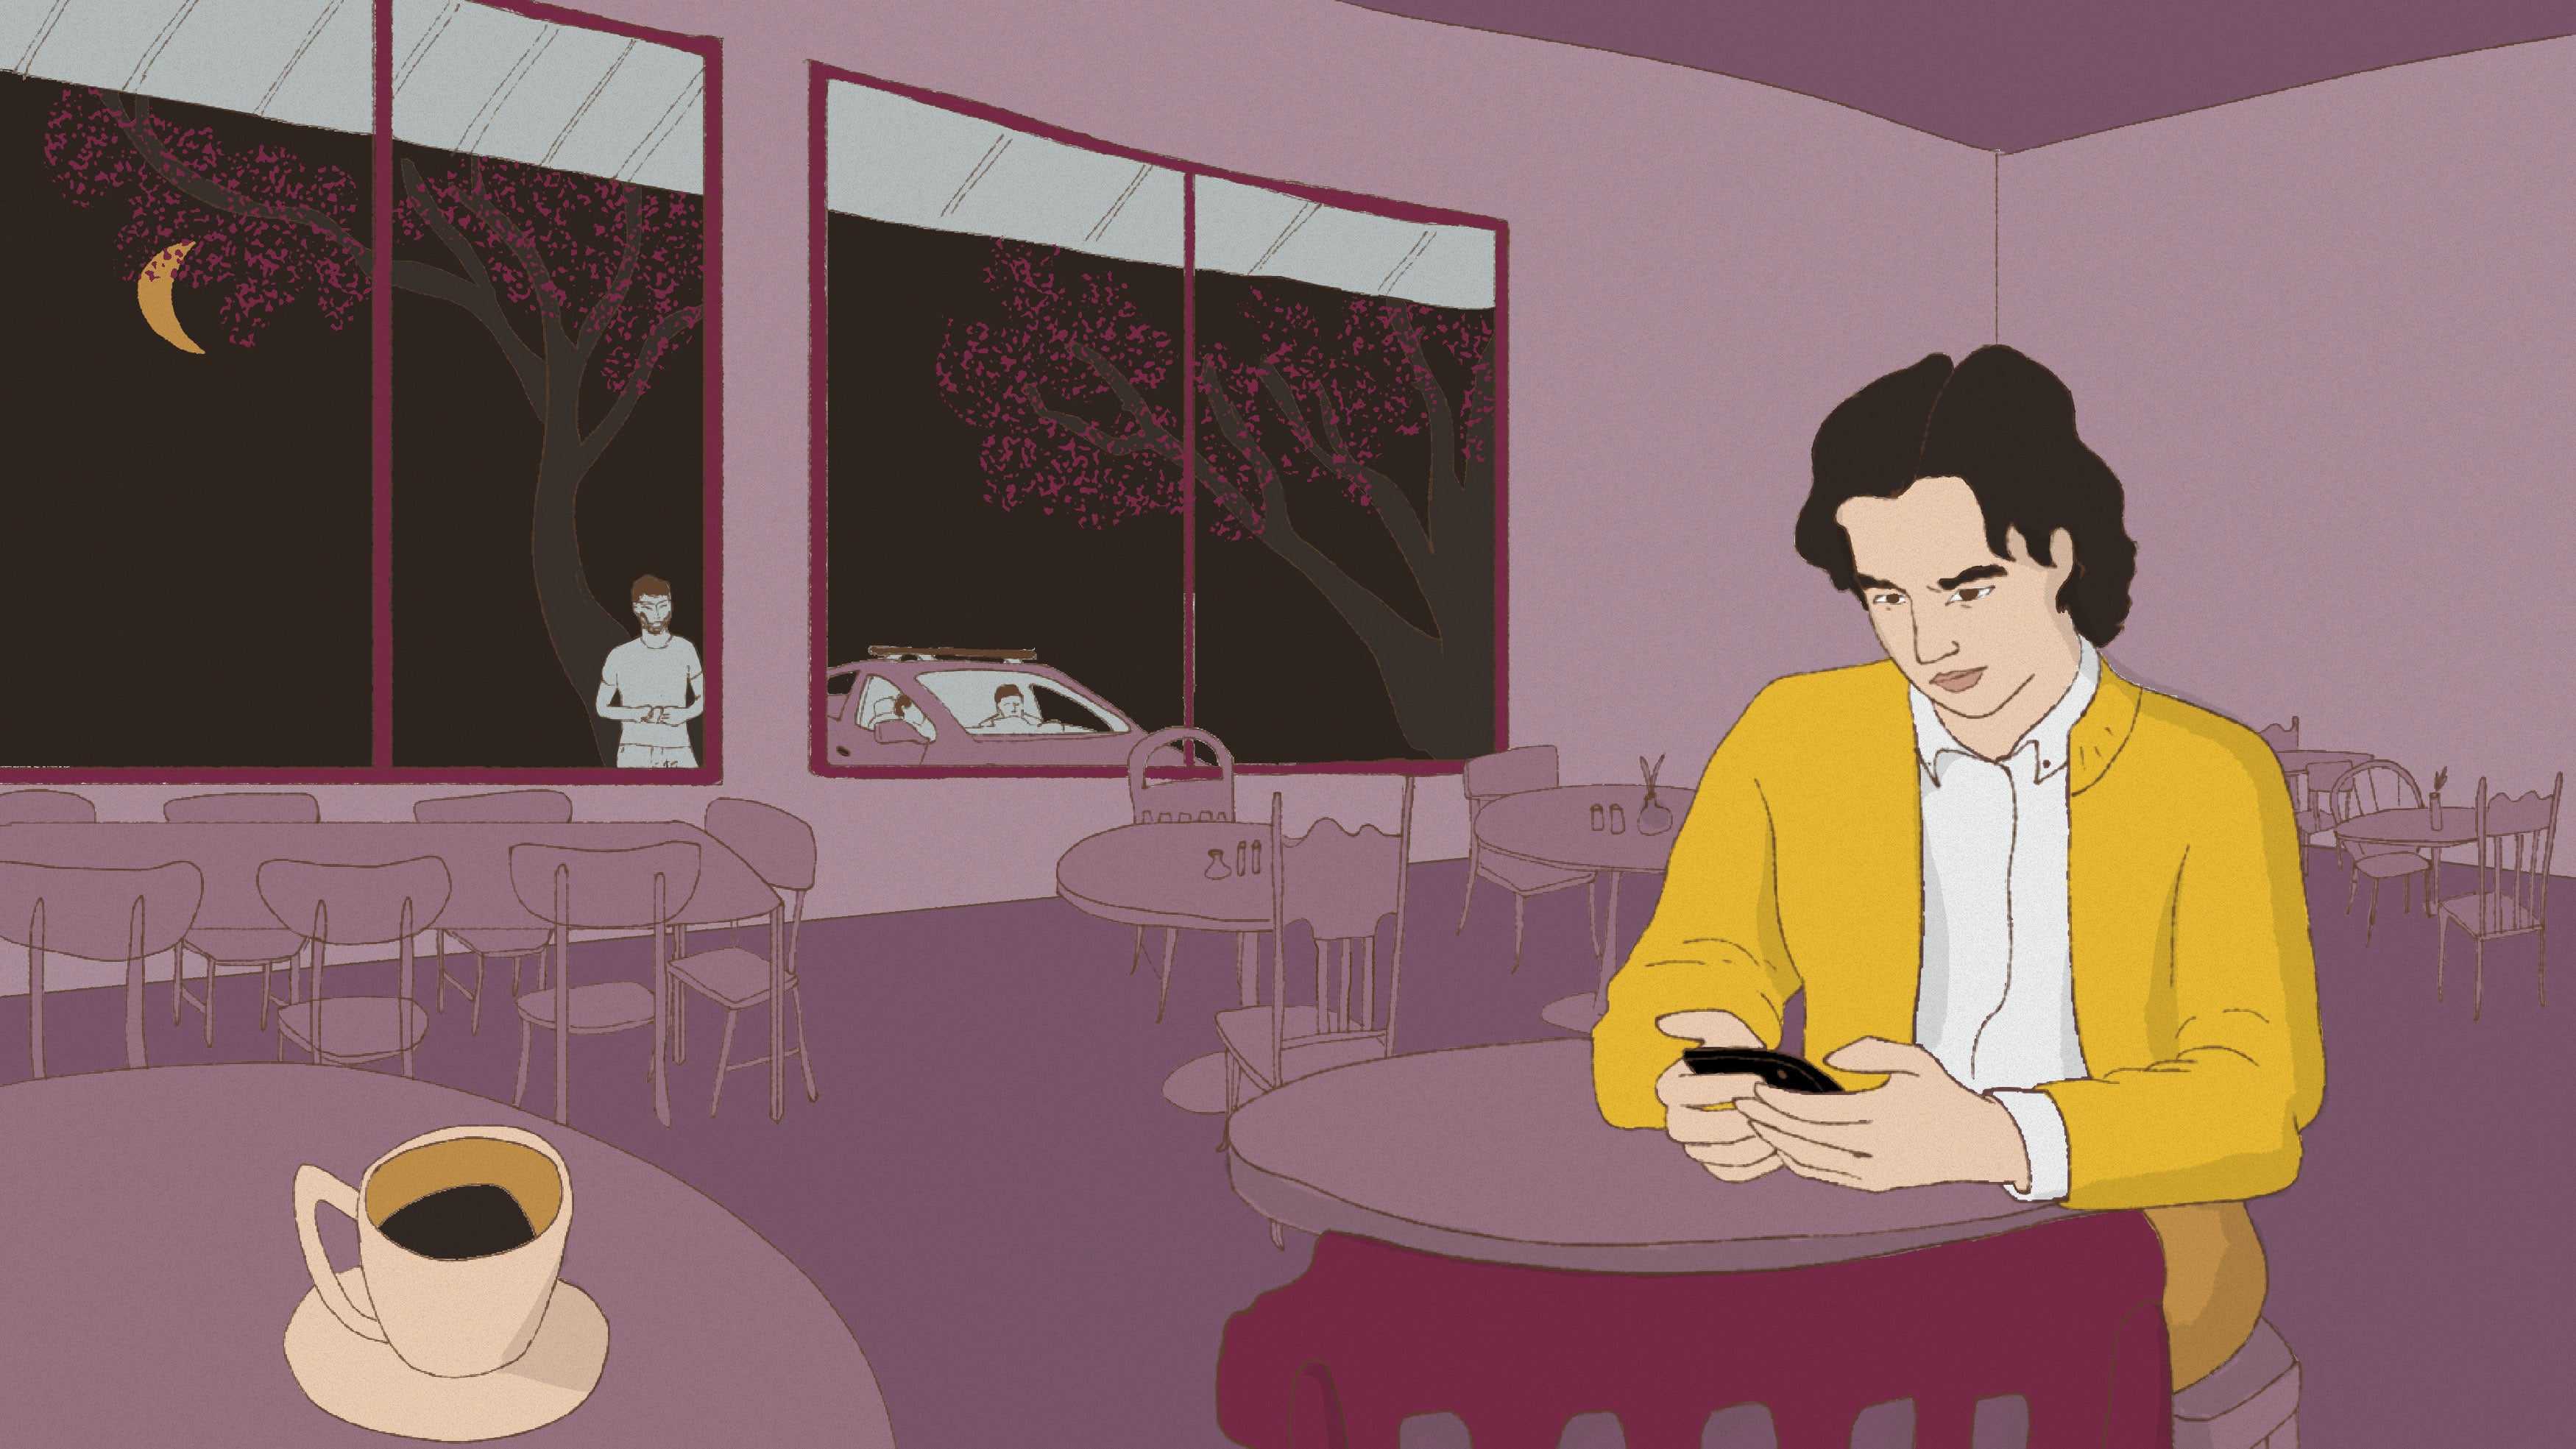 Illustration of a man on his phone in a cafe